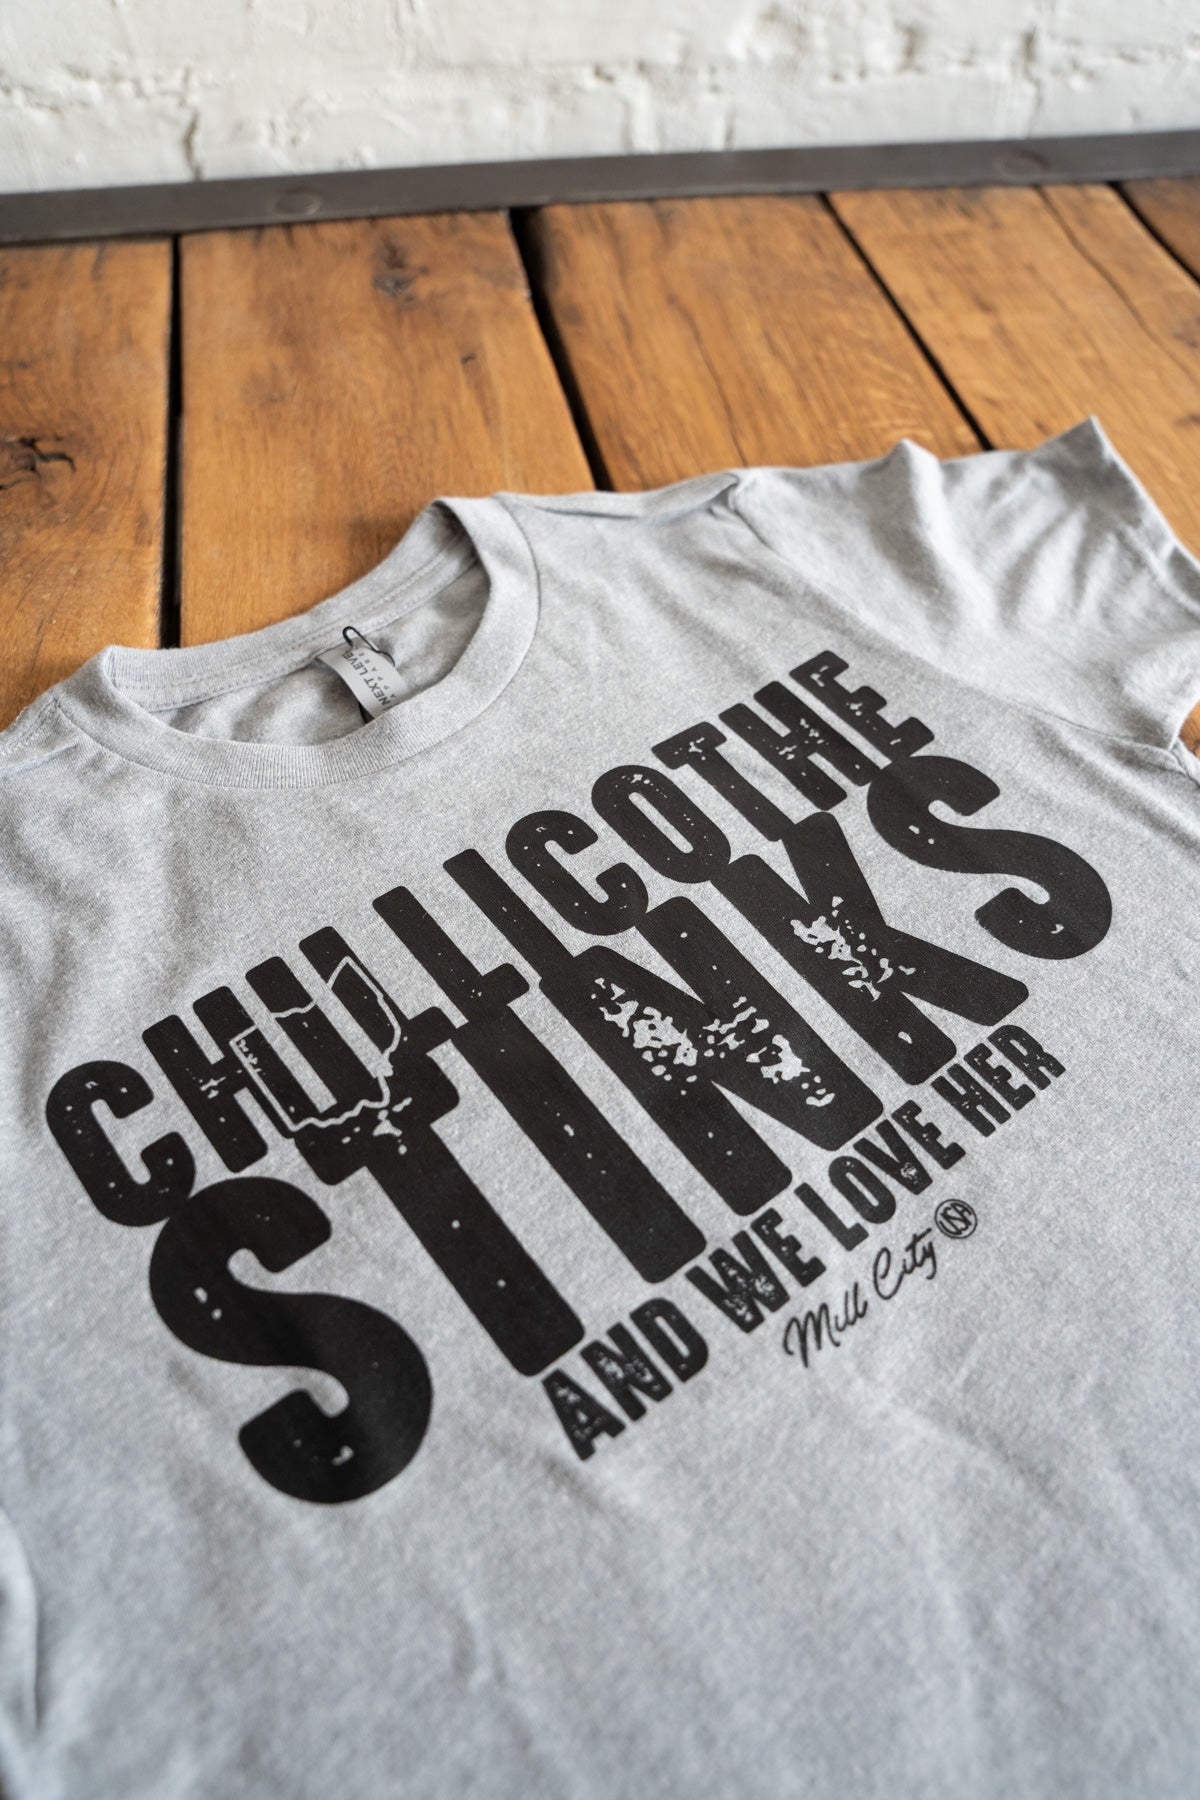 Chillicothe Stinks Tee - Youth